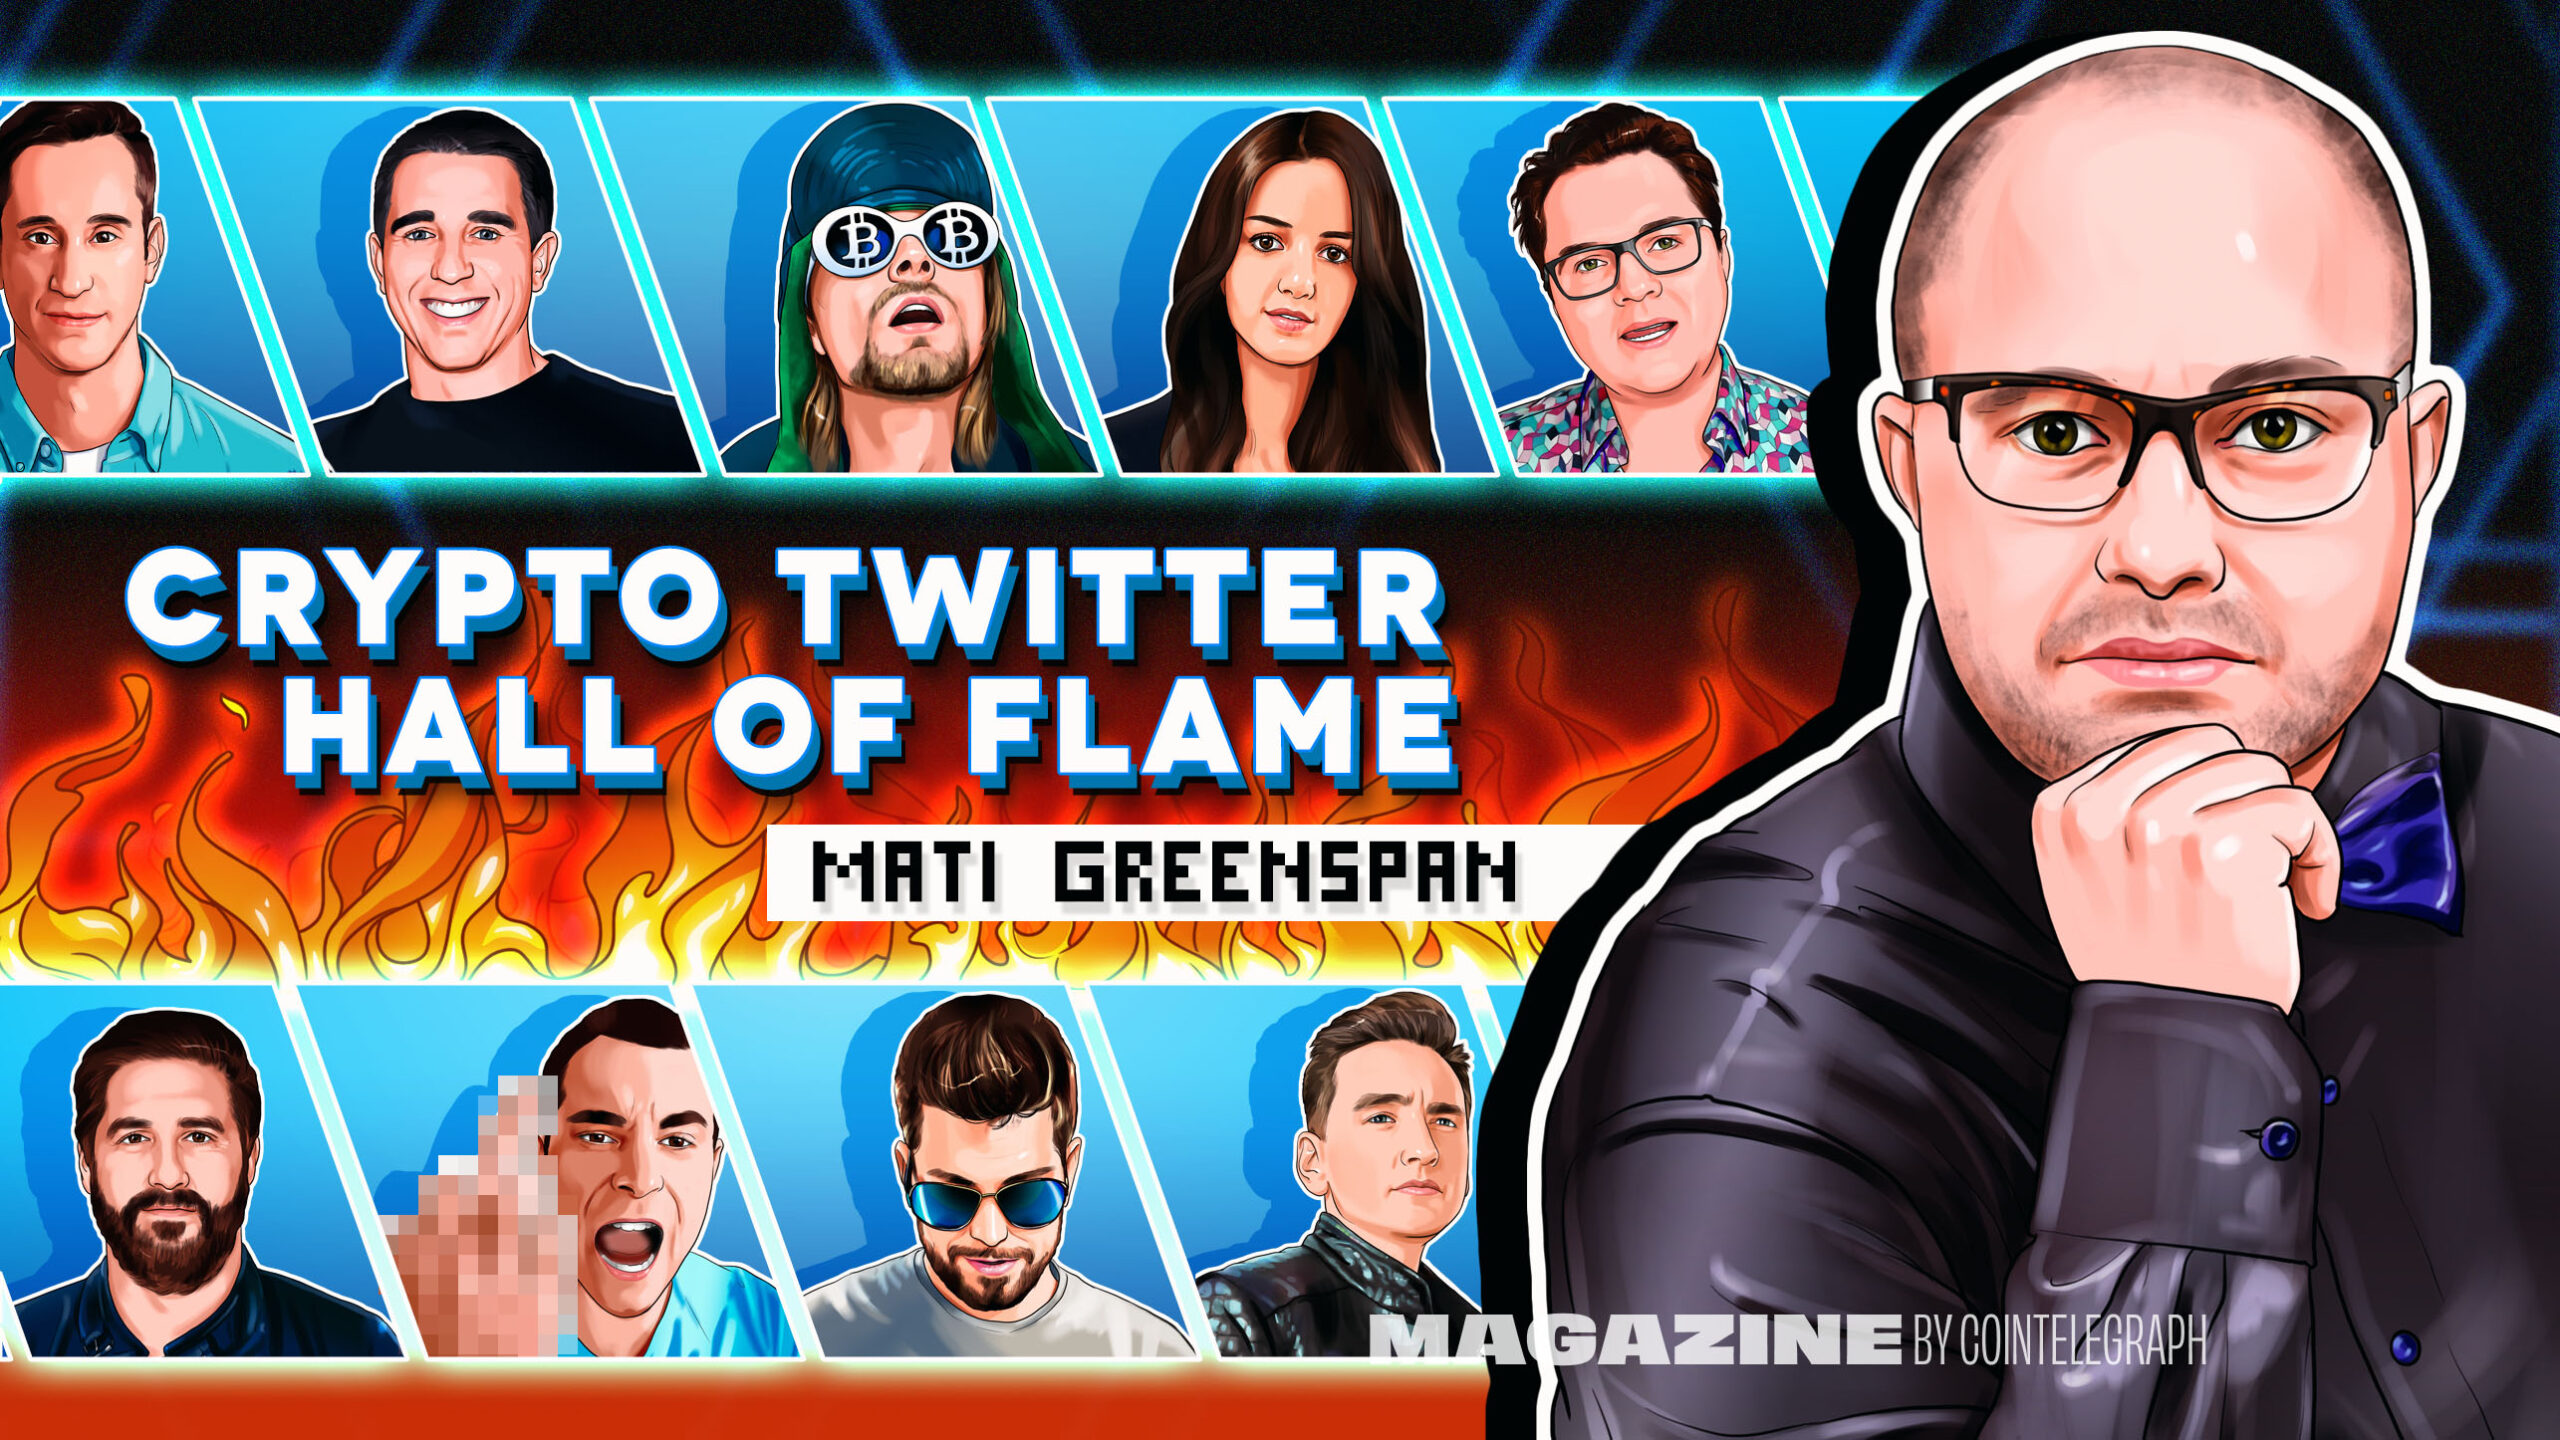 Mati-greenspan’s-boss-bribed-him-with-1-btc-to-join-twitter:-hall-of-flame